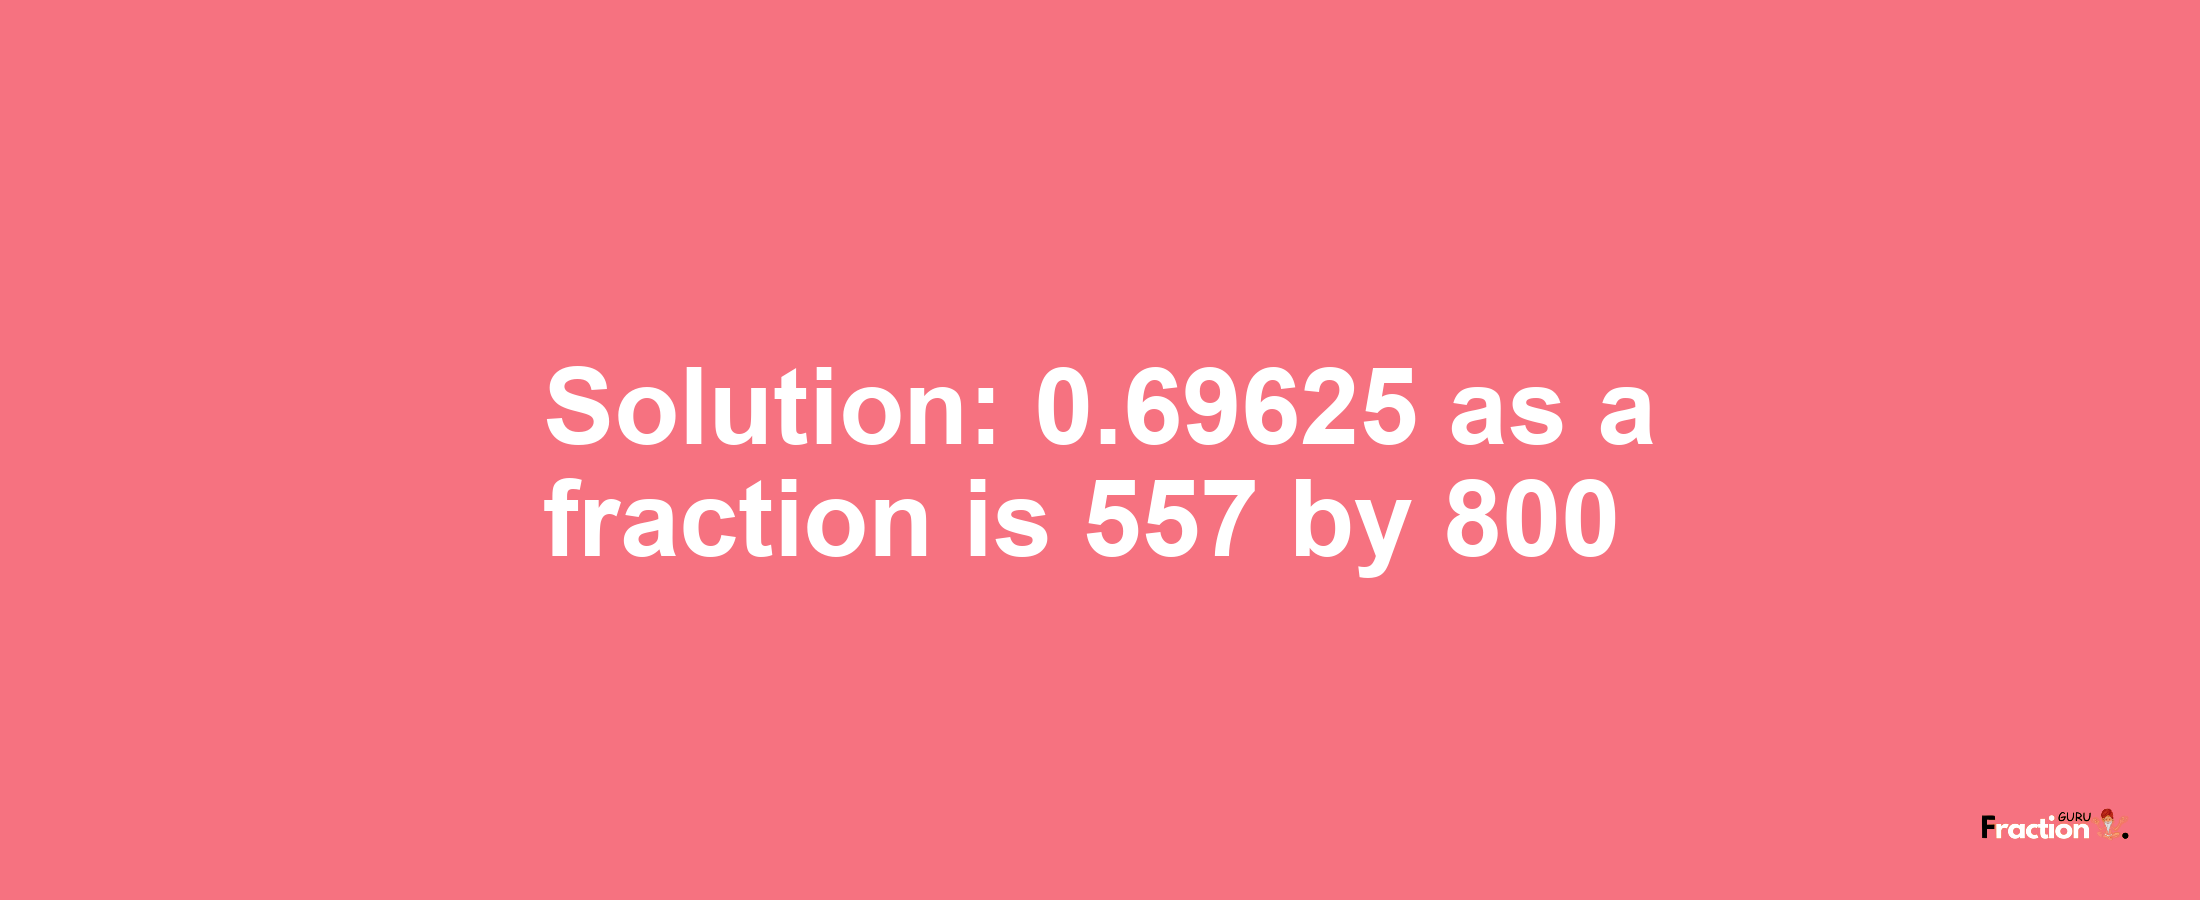 Solution:0.69625 as a fraction is 557/800